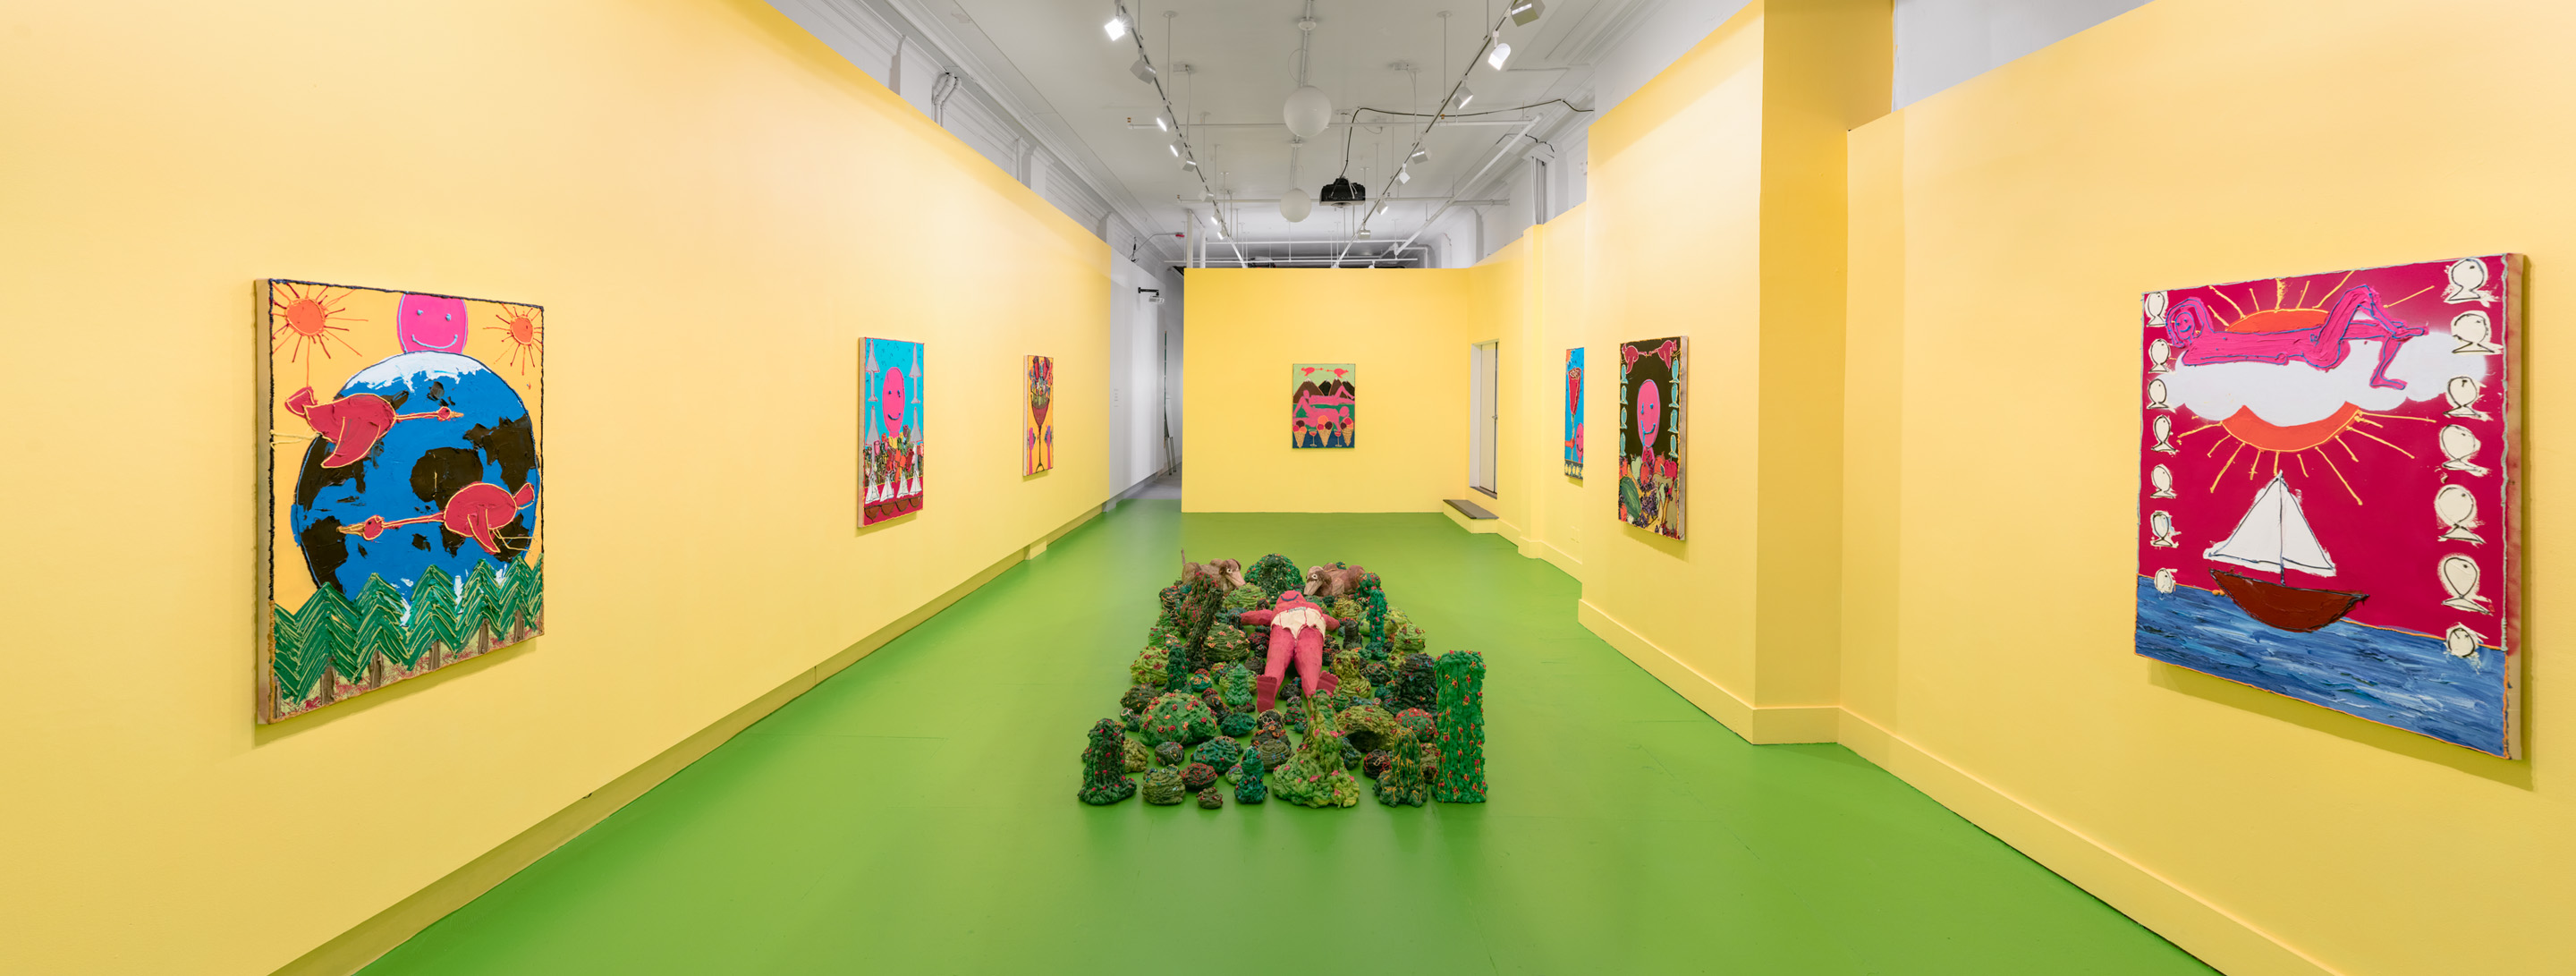 installation view of Dave Eassa's Stop and Smell the Roses Sometimes, 2018. Photo by Joel Tsui.